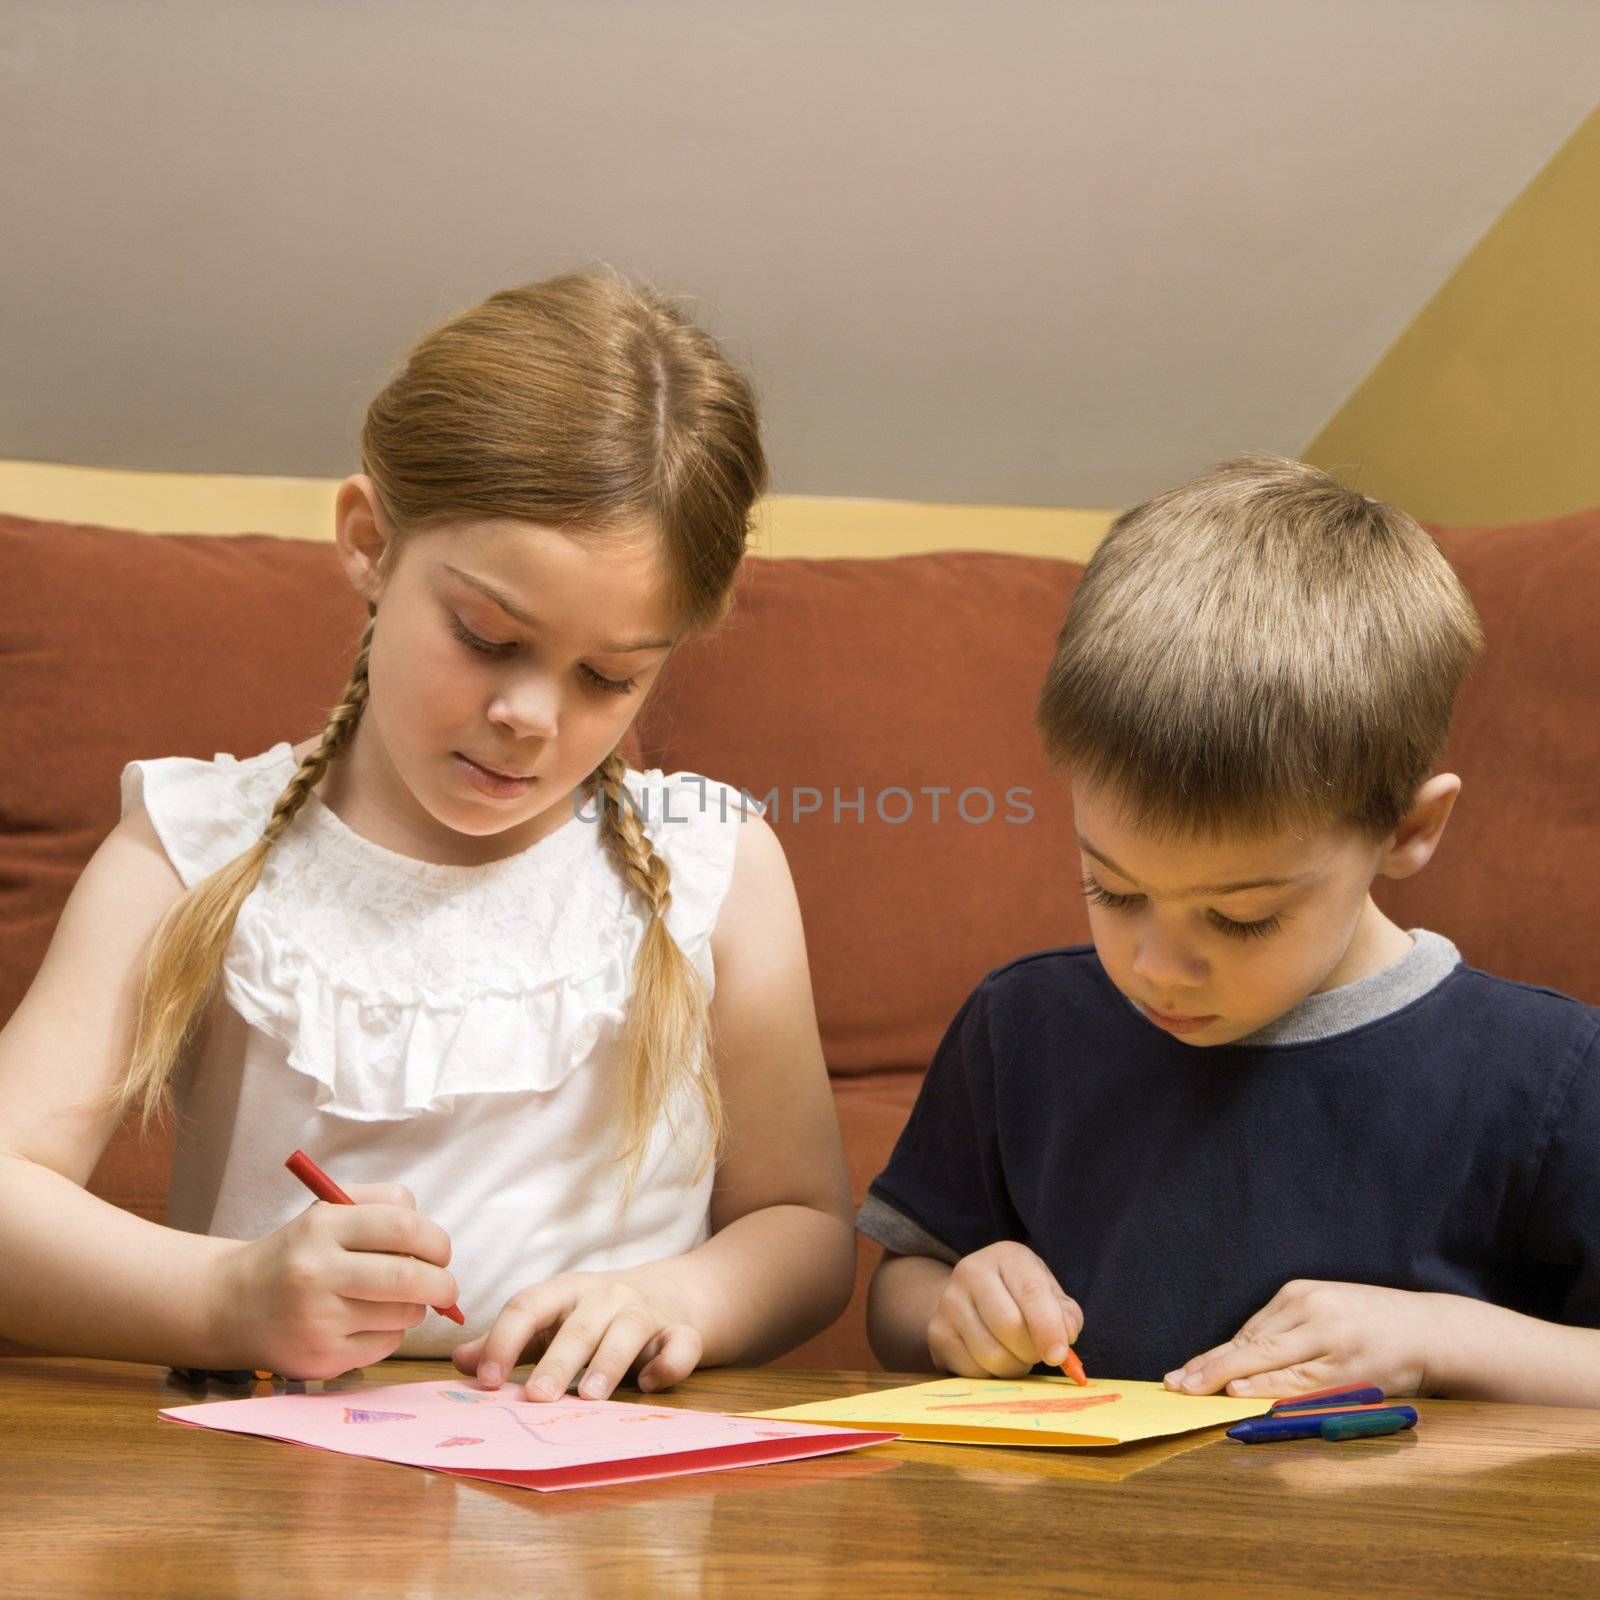 Caucasian boy and girl drawing on paper with crayons.